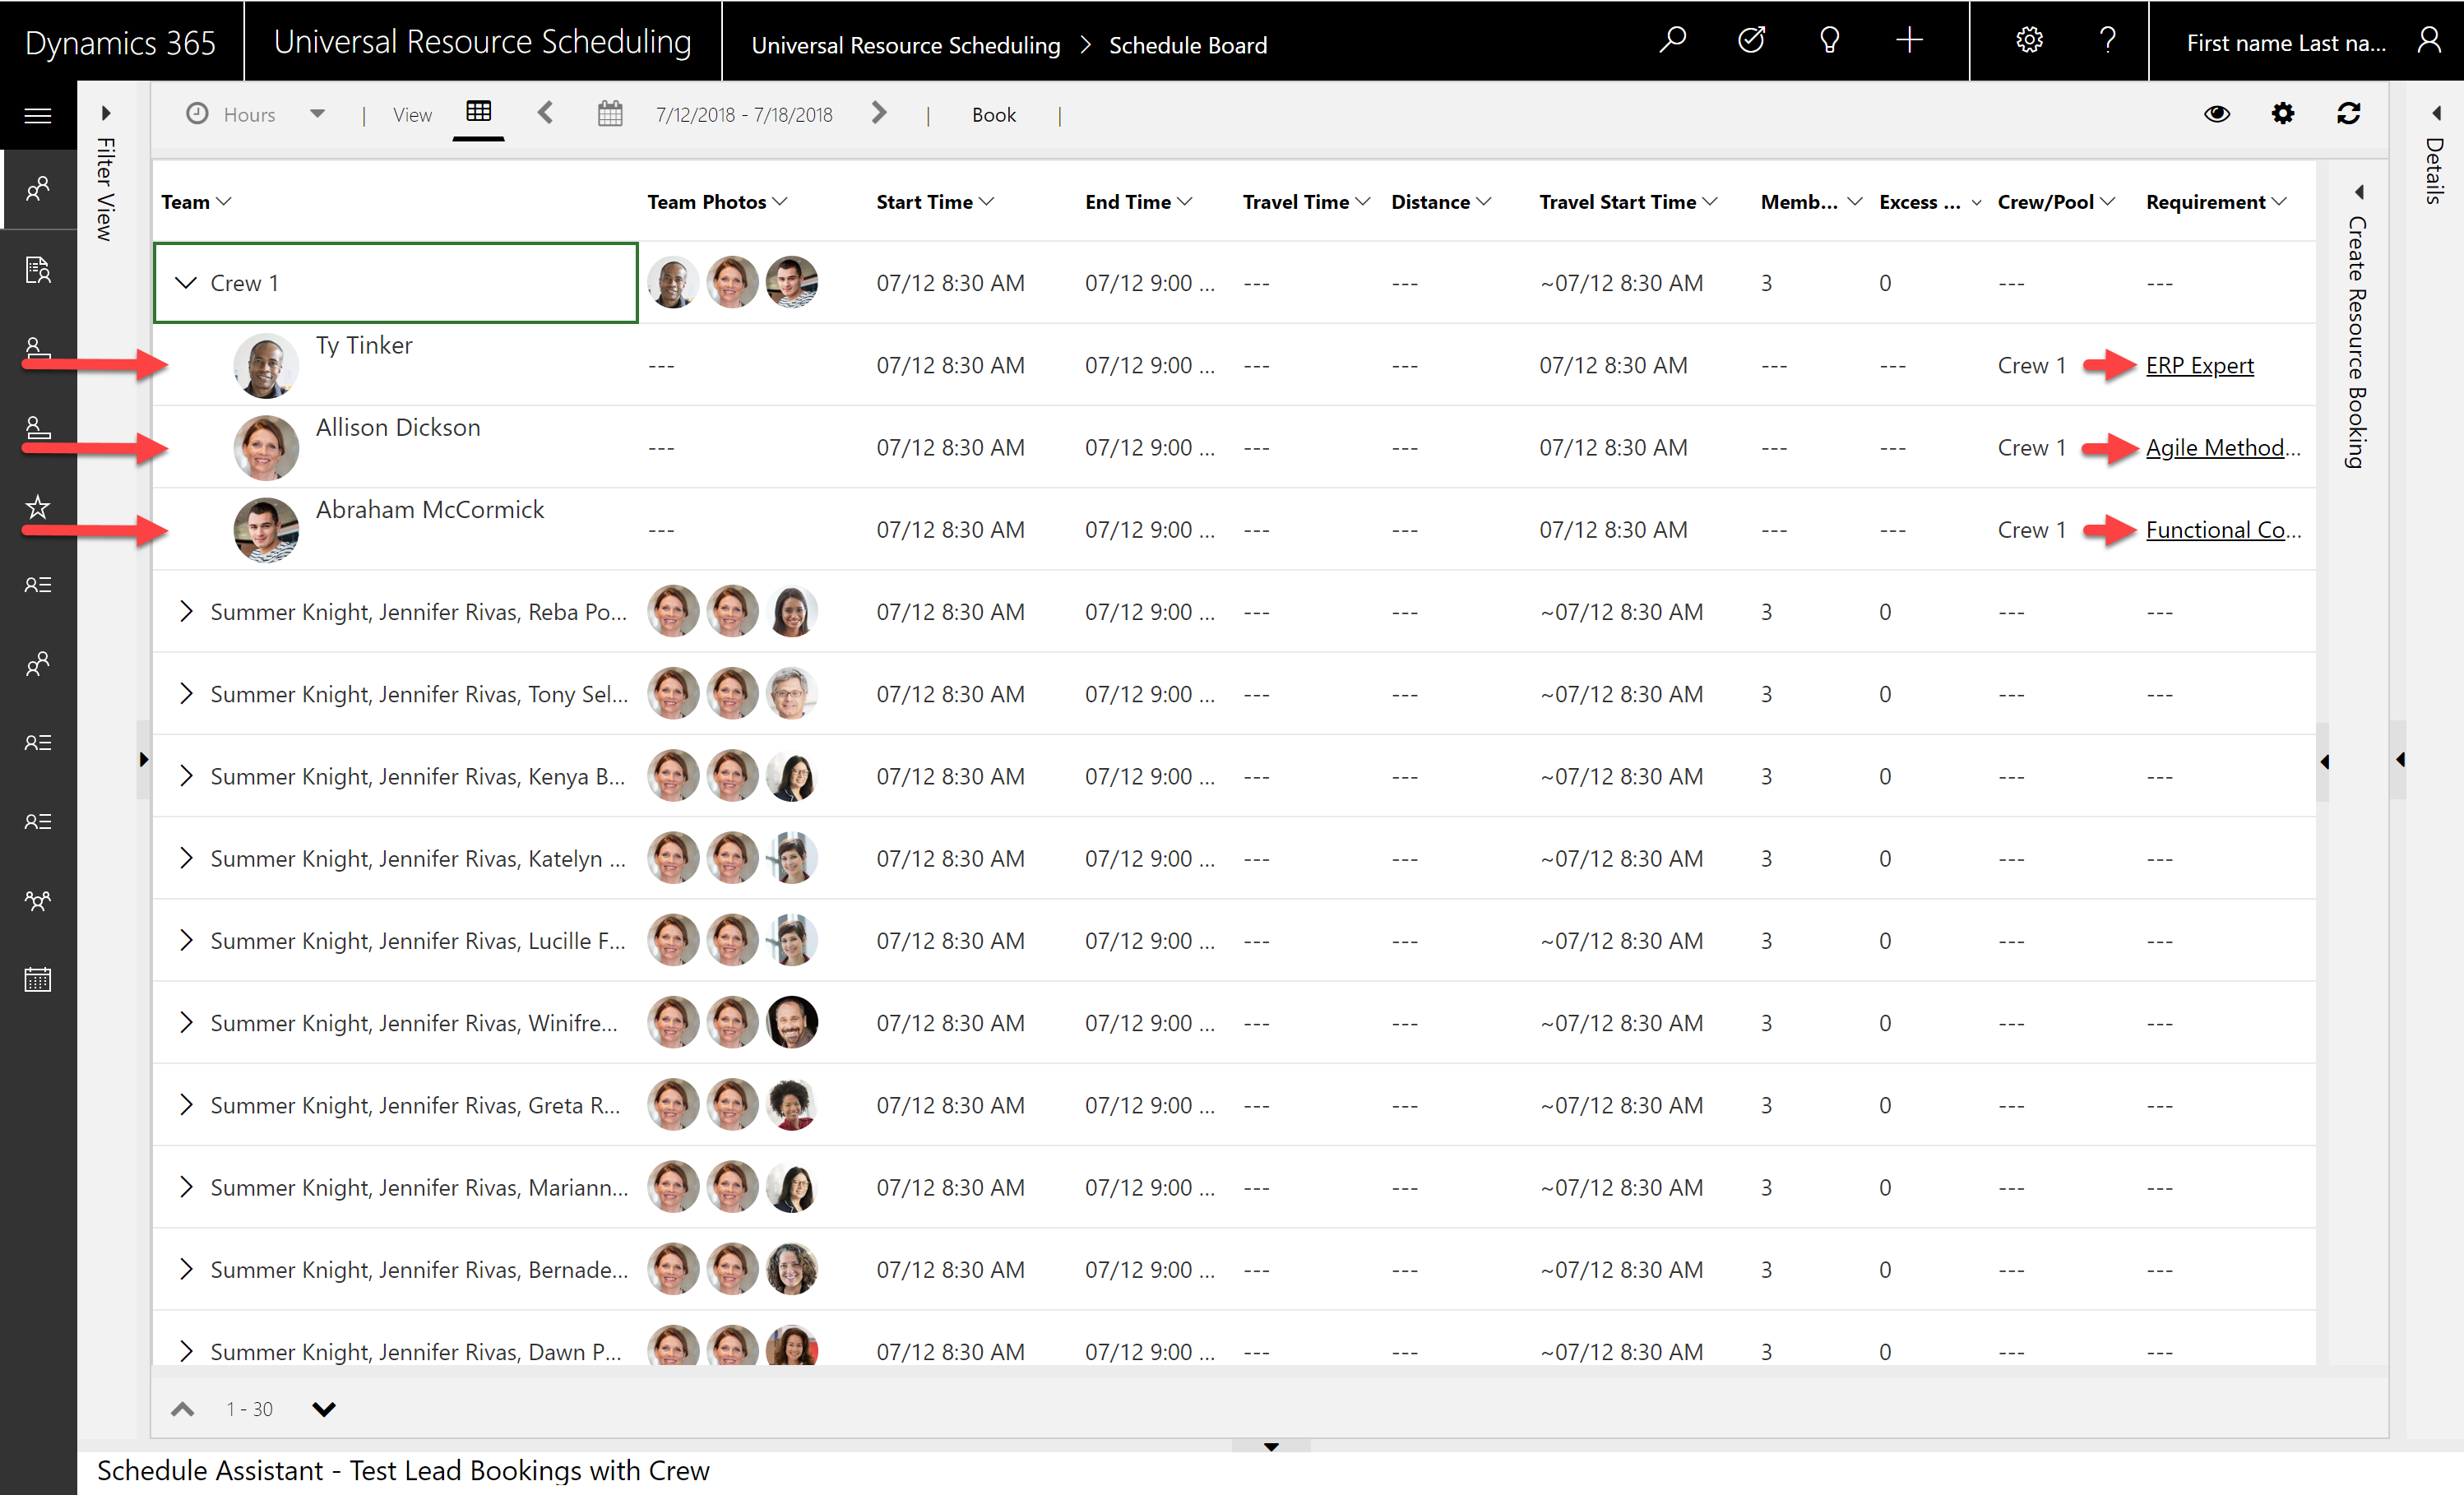 Screenshot of schedule assistant matching with a crew. The crew is expanded and shows three crew members, each of which are matched to a requirement from the requirement group.